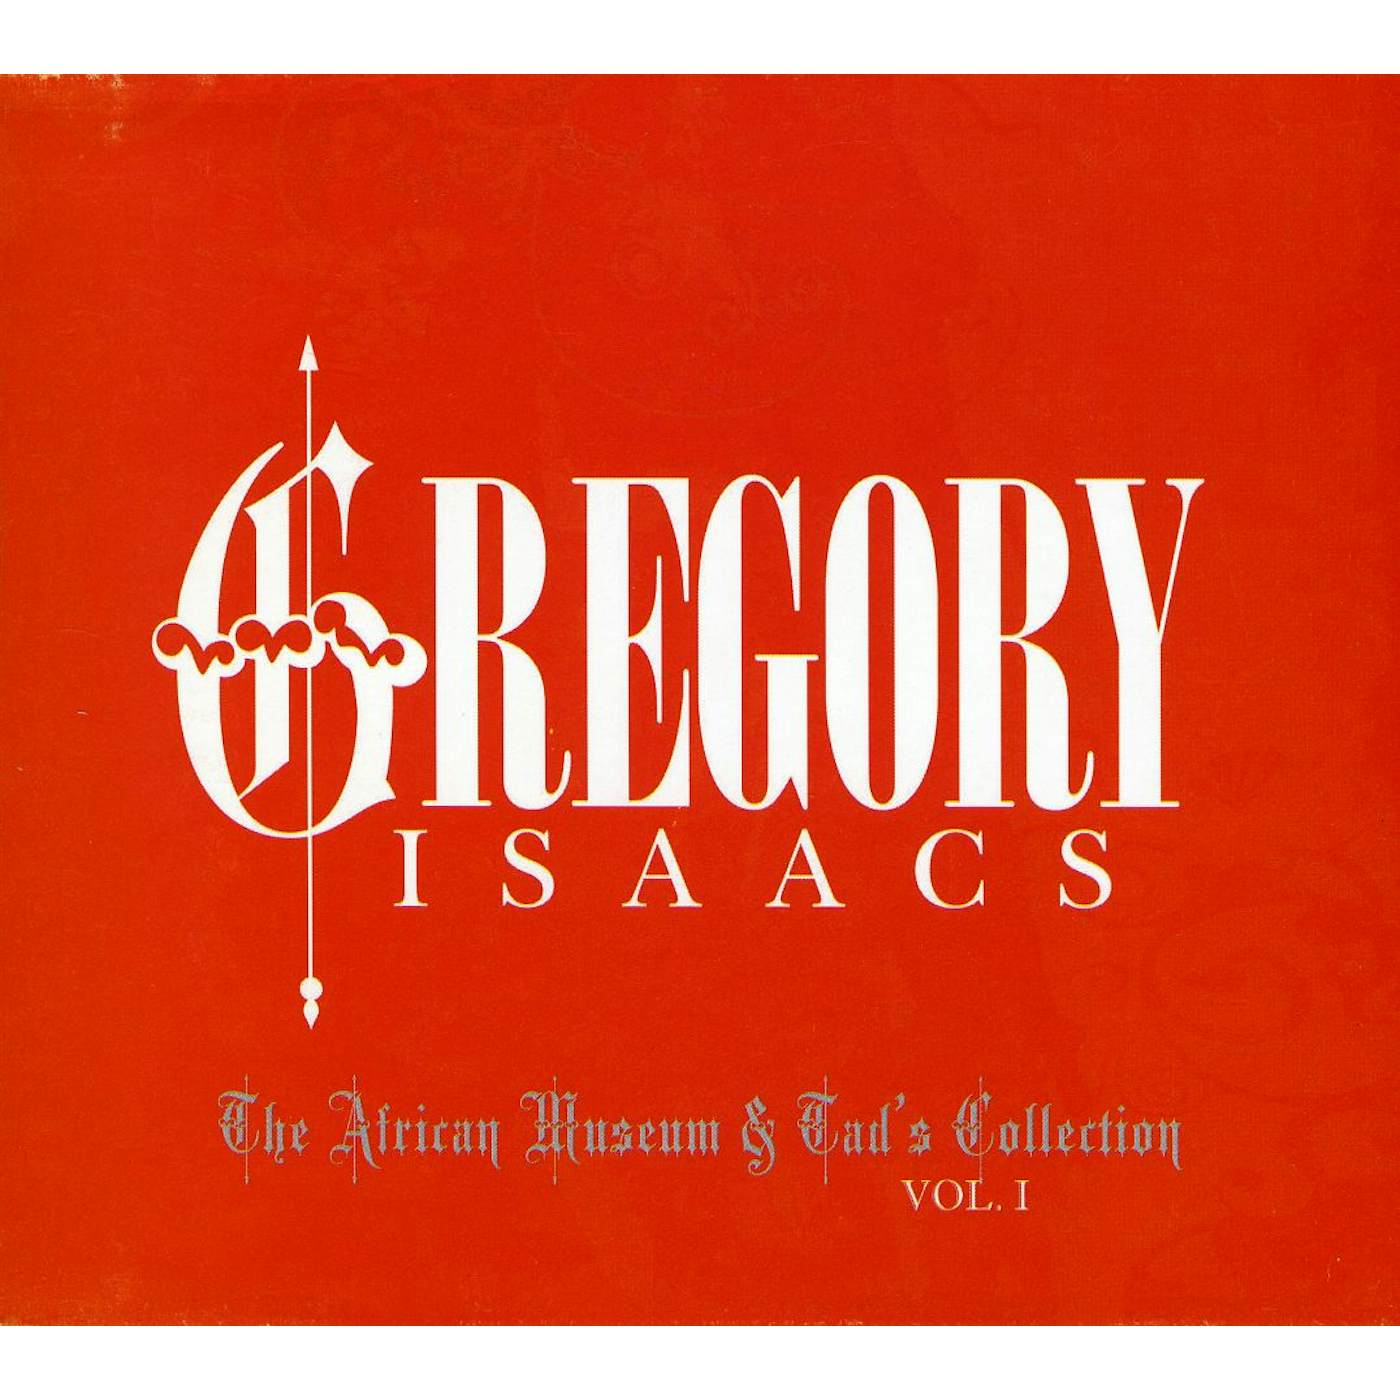 Gregory Isaacs AFRICAN MUSEUM & TADS COLLECTIONS 1 CD